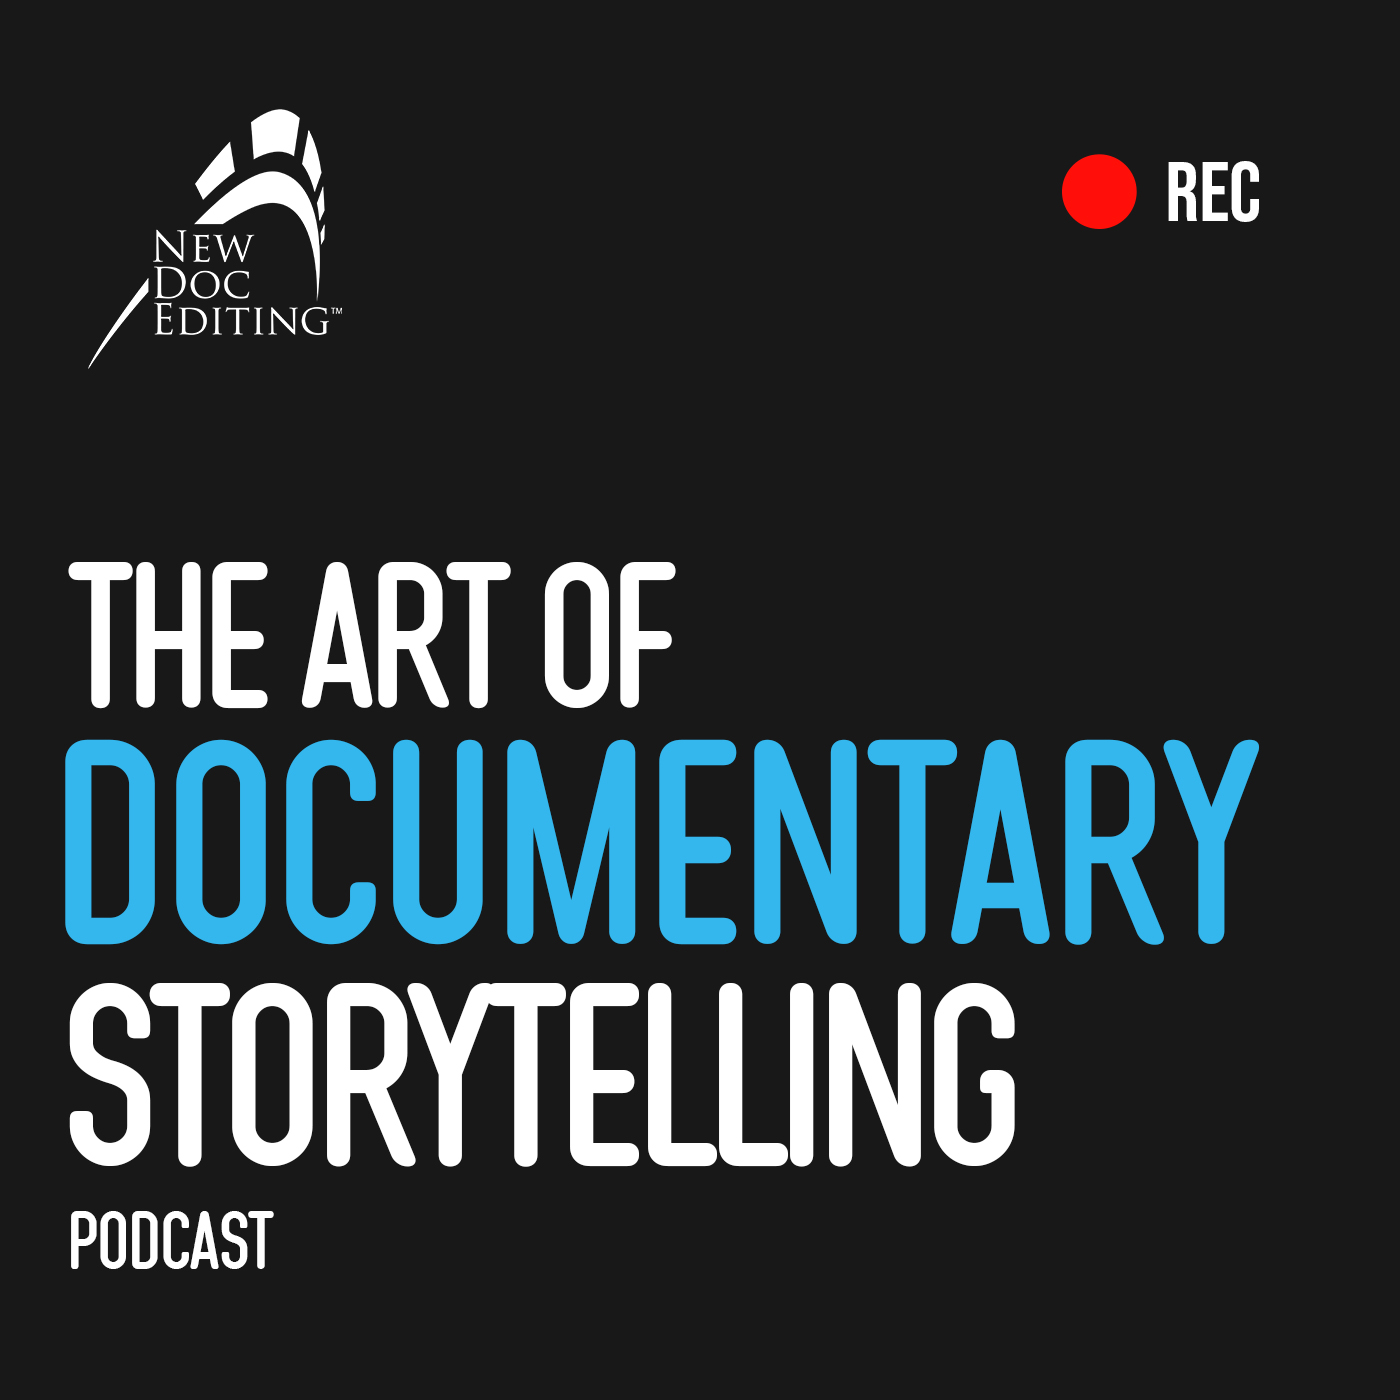 Announcing New Podcast: “The Art of Documentary Storytelling”